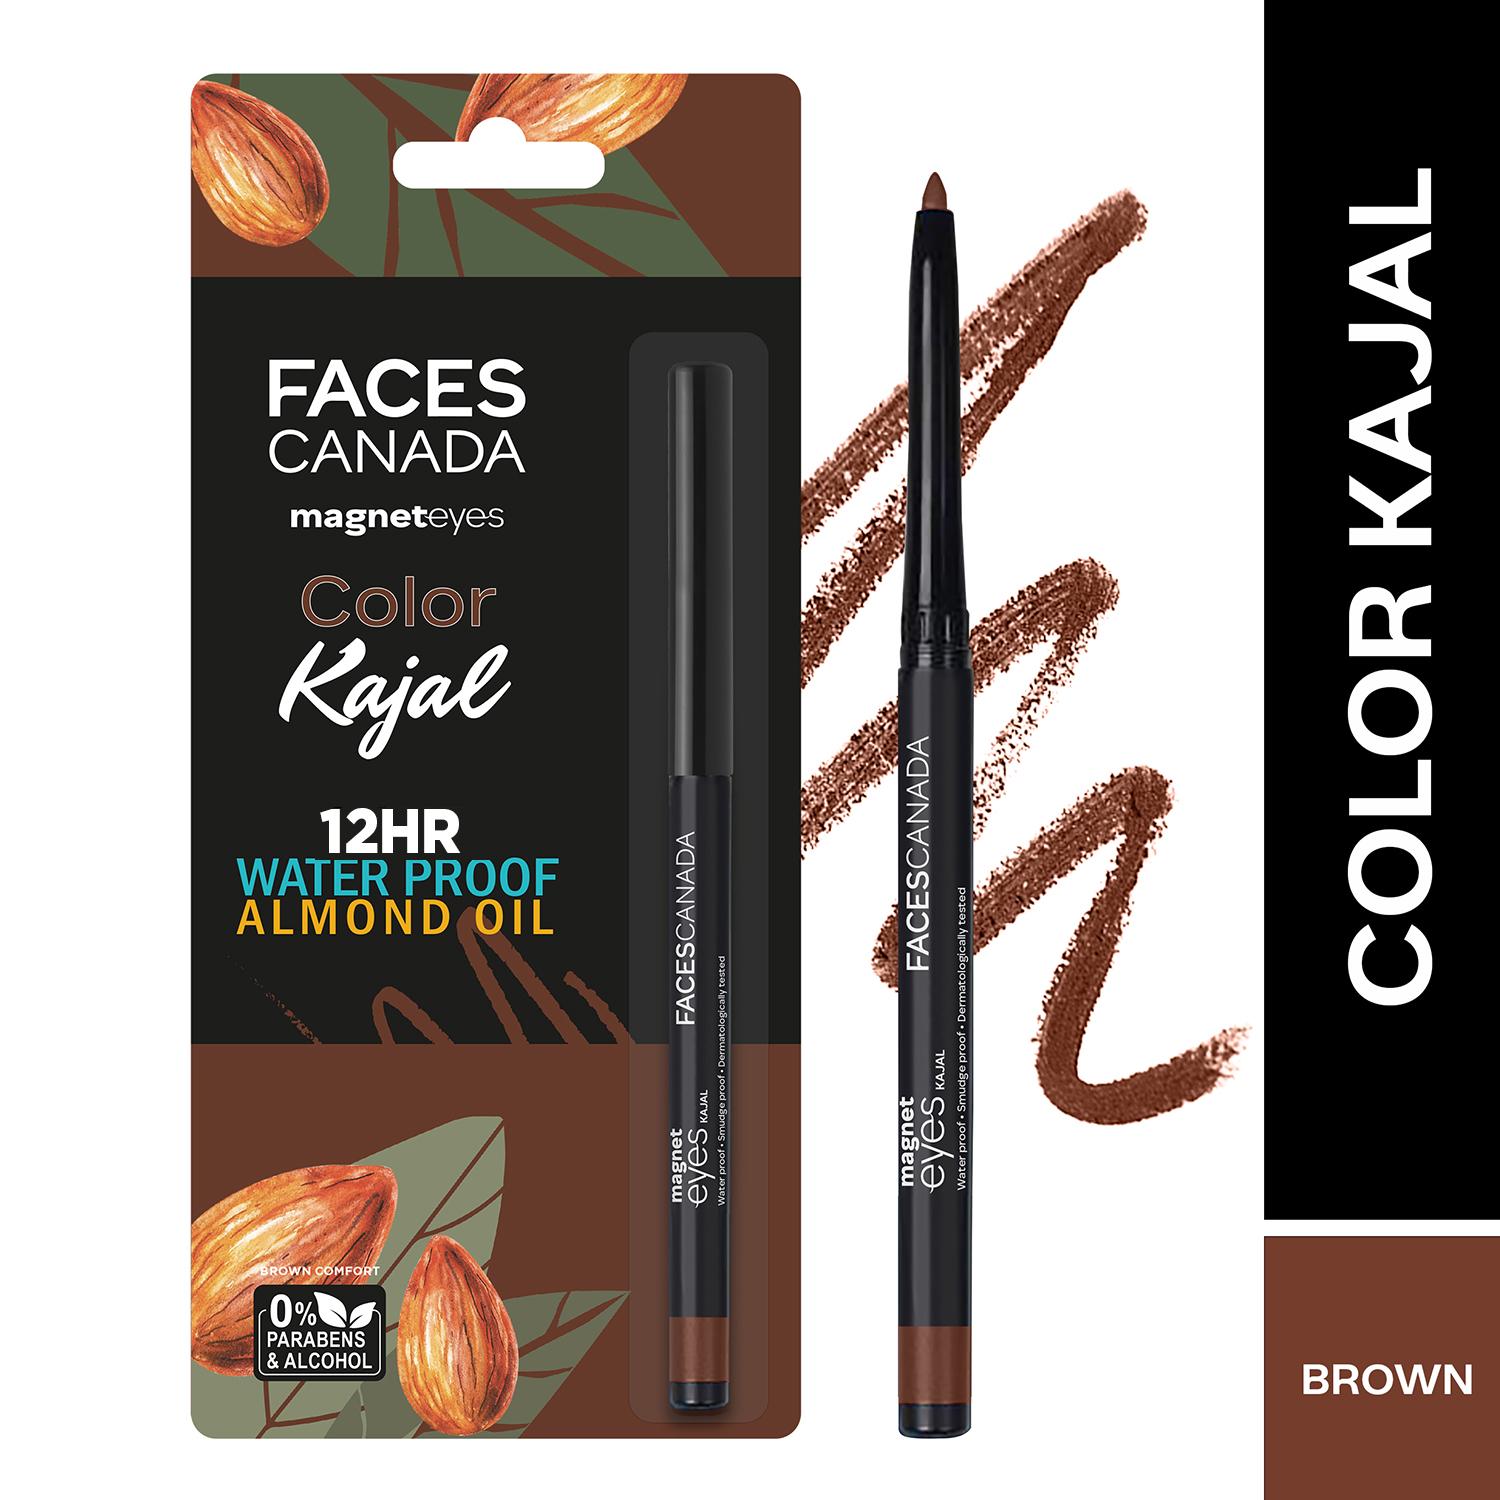 Faces Canada | Faces Canada Magneteyes Color Kajal, 12 HR Stay, Matte Finish,Water Proof -Brown Comfort 03 (0.30 g)